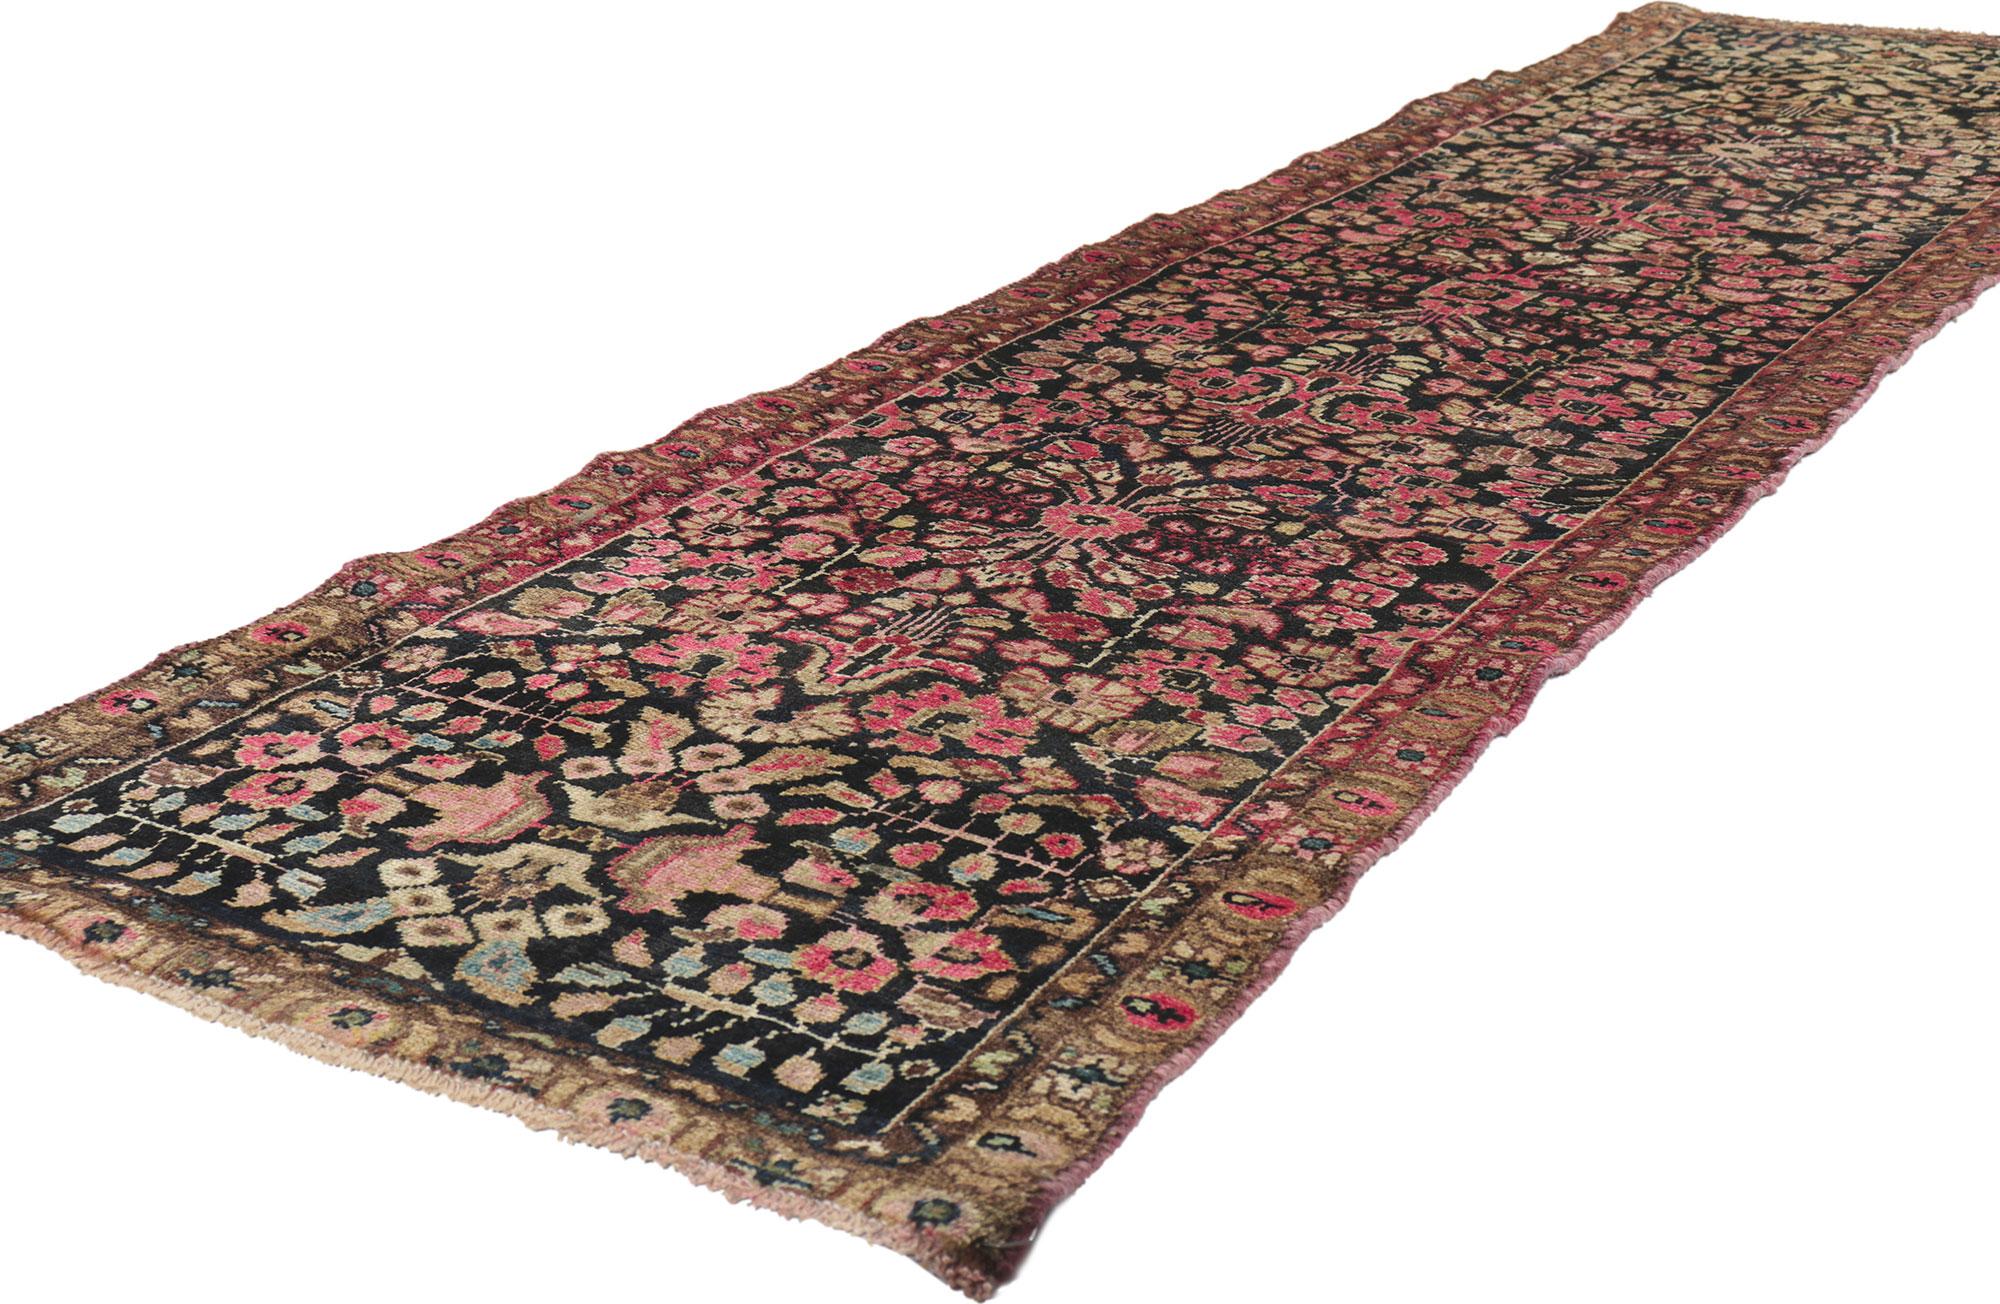 61199 Antique Persian hamadan runner, 02'03 x 09'04.
?With its timeless style, incredible detail and texture, this hand knotted wool antique Persian Hamadan runner is a captivating vision of woven beauty. The geometric Sarouk design and refined